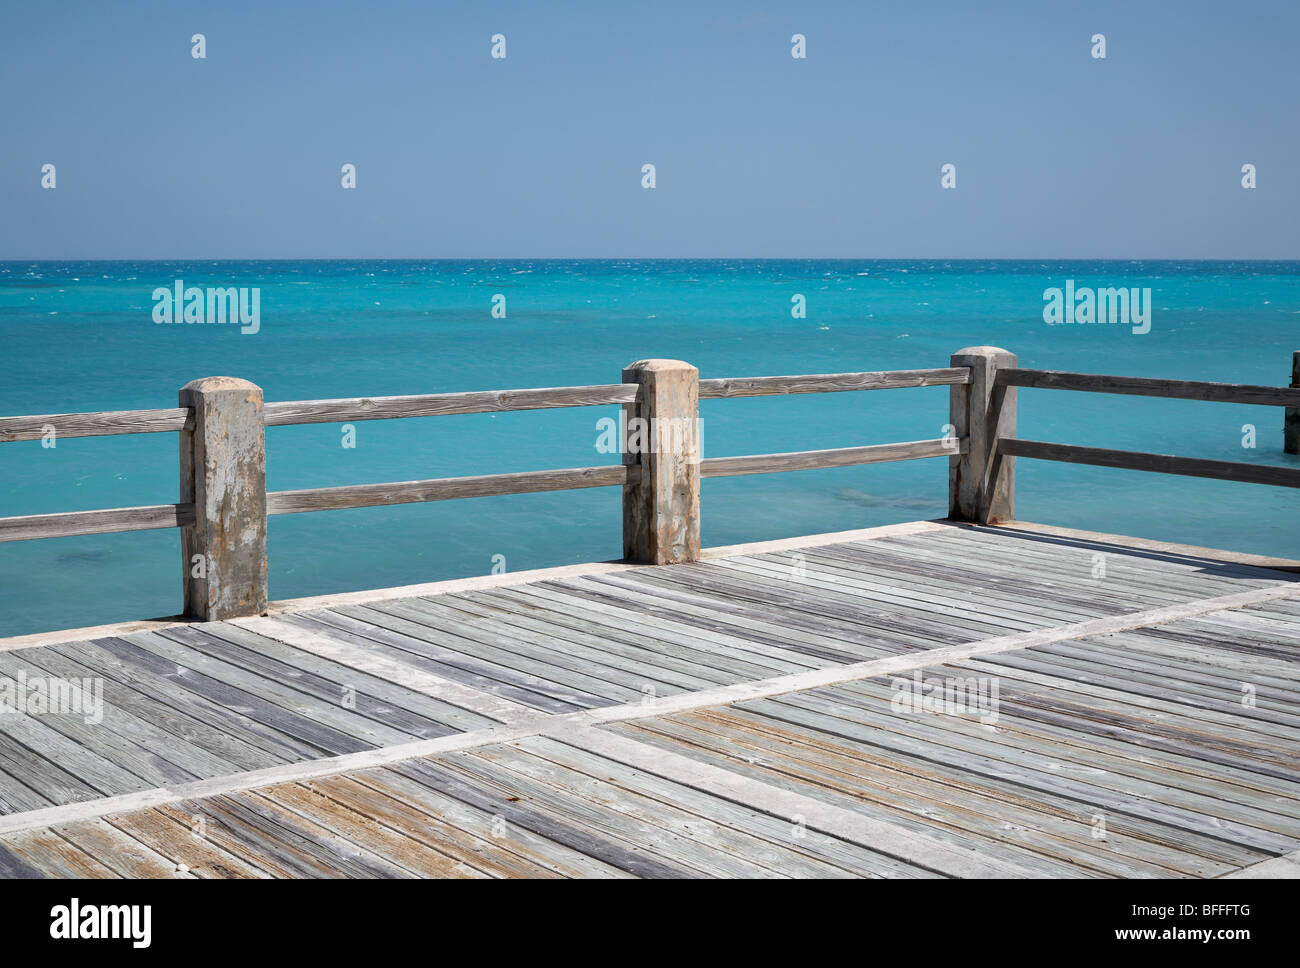 Jetty looking out over turquoise sea, Bermuda Stock Photo